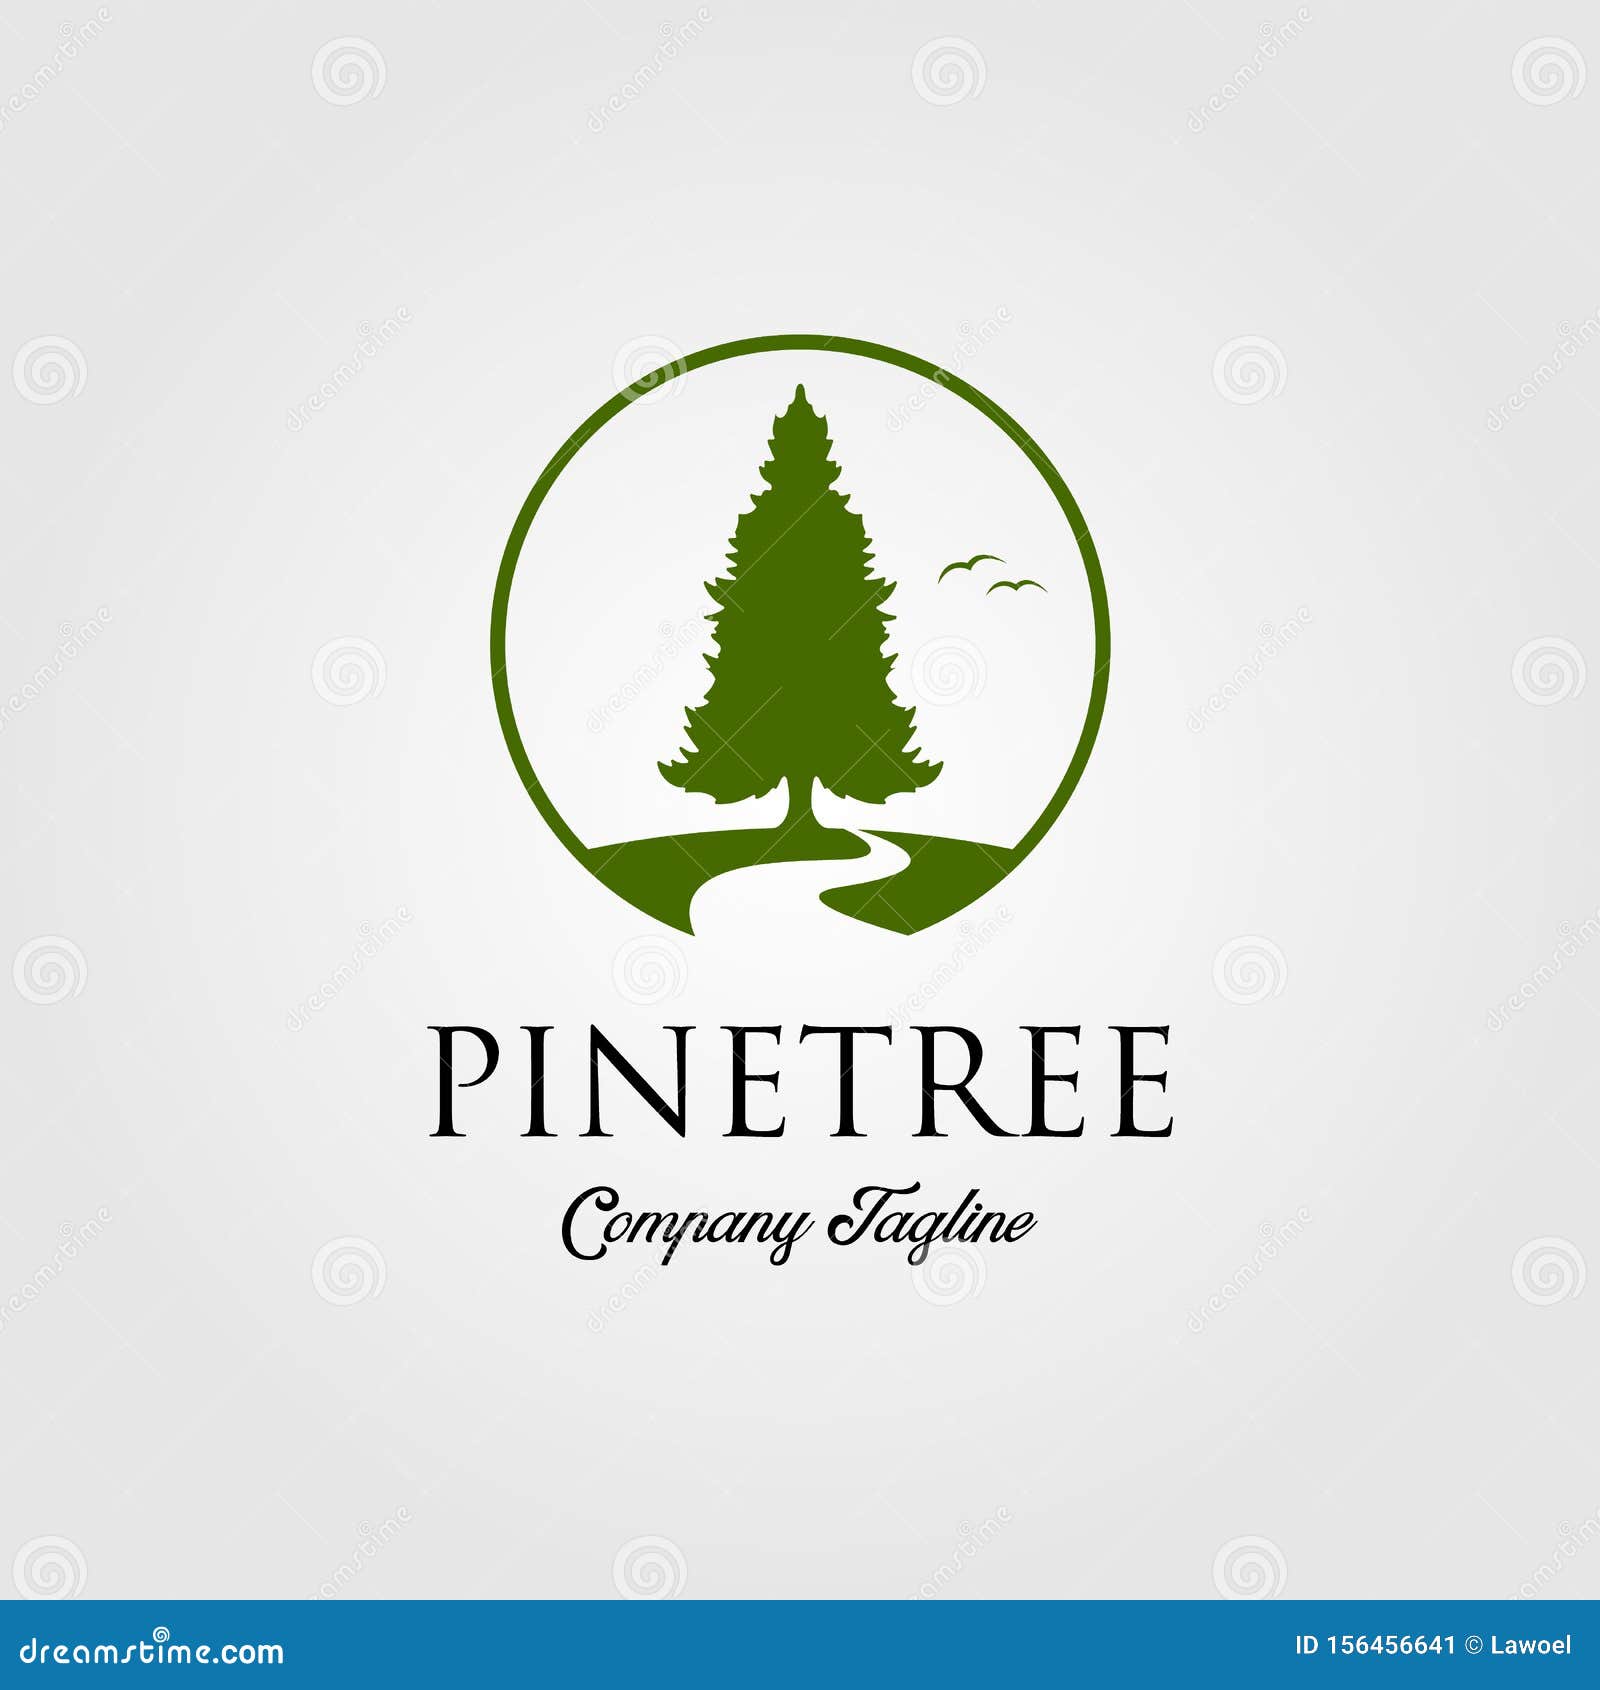 pine tree logo with river or creek